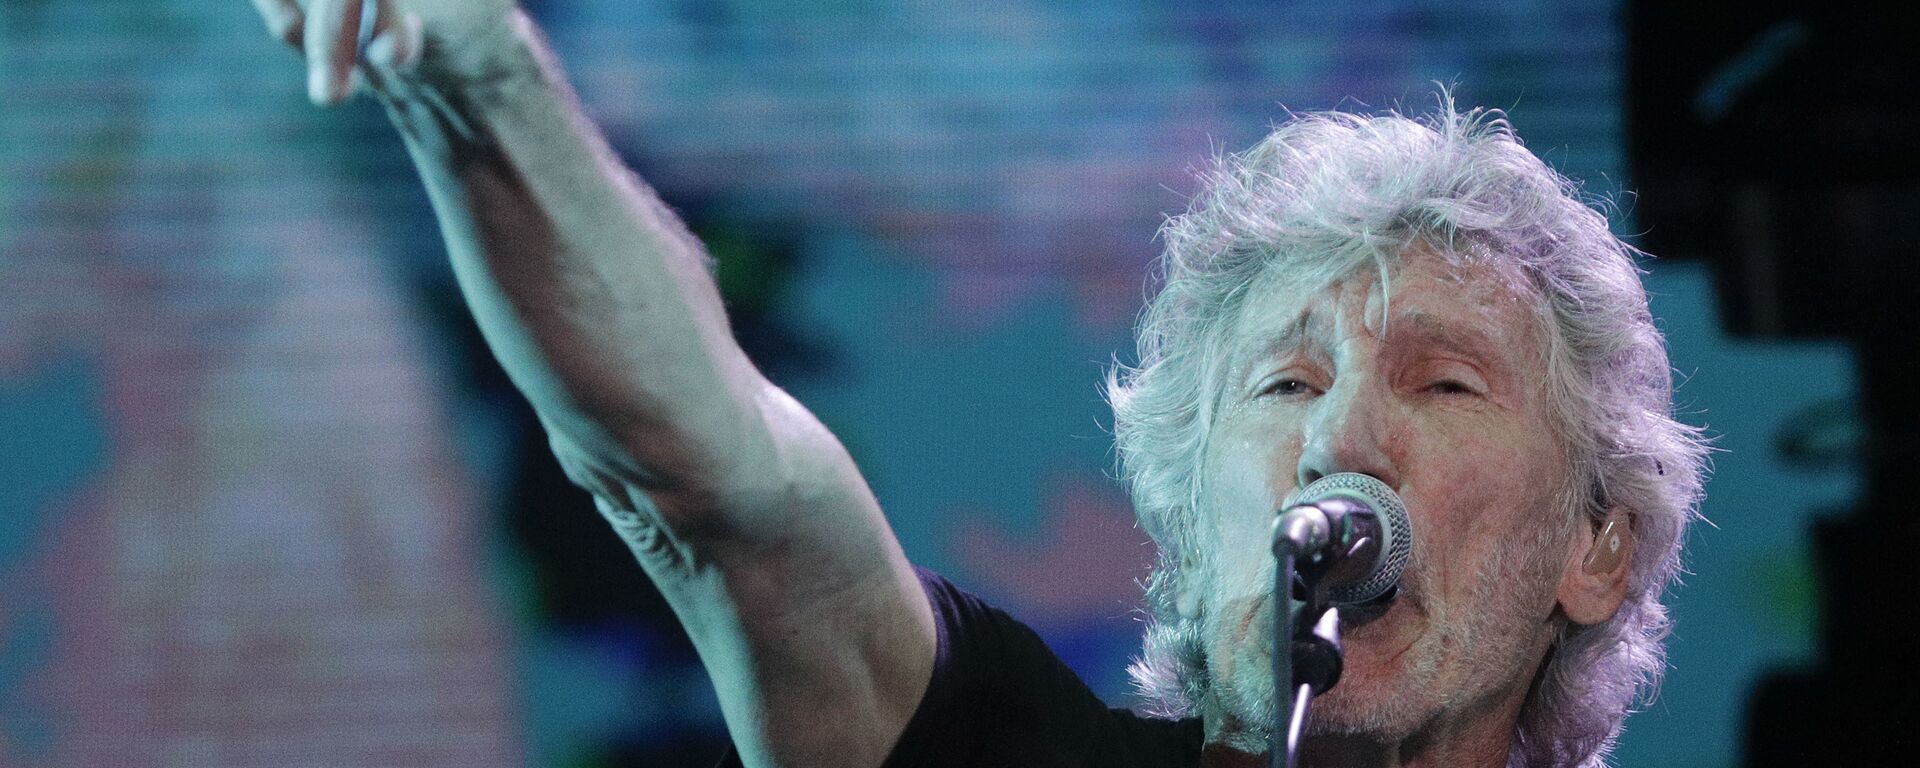 Former member of Pink Floyd, British singer and songwriter Roger Waters performs during his concert of the Us+Them tour in Rome's Circus Maximus, Saturday, July 14, 2018 - Sputnik Türkiye, 1920, 25.09.2022